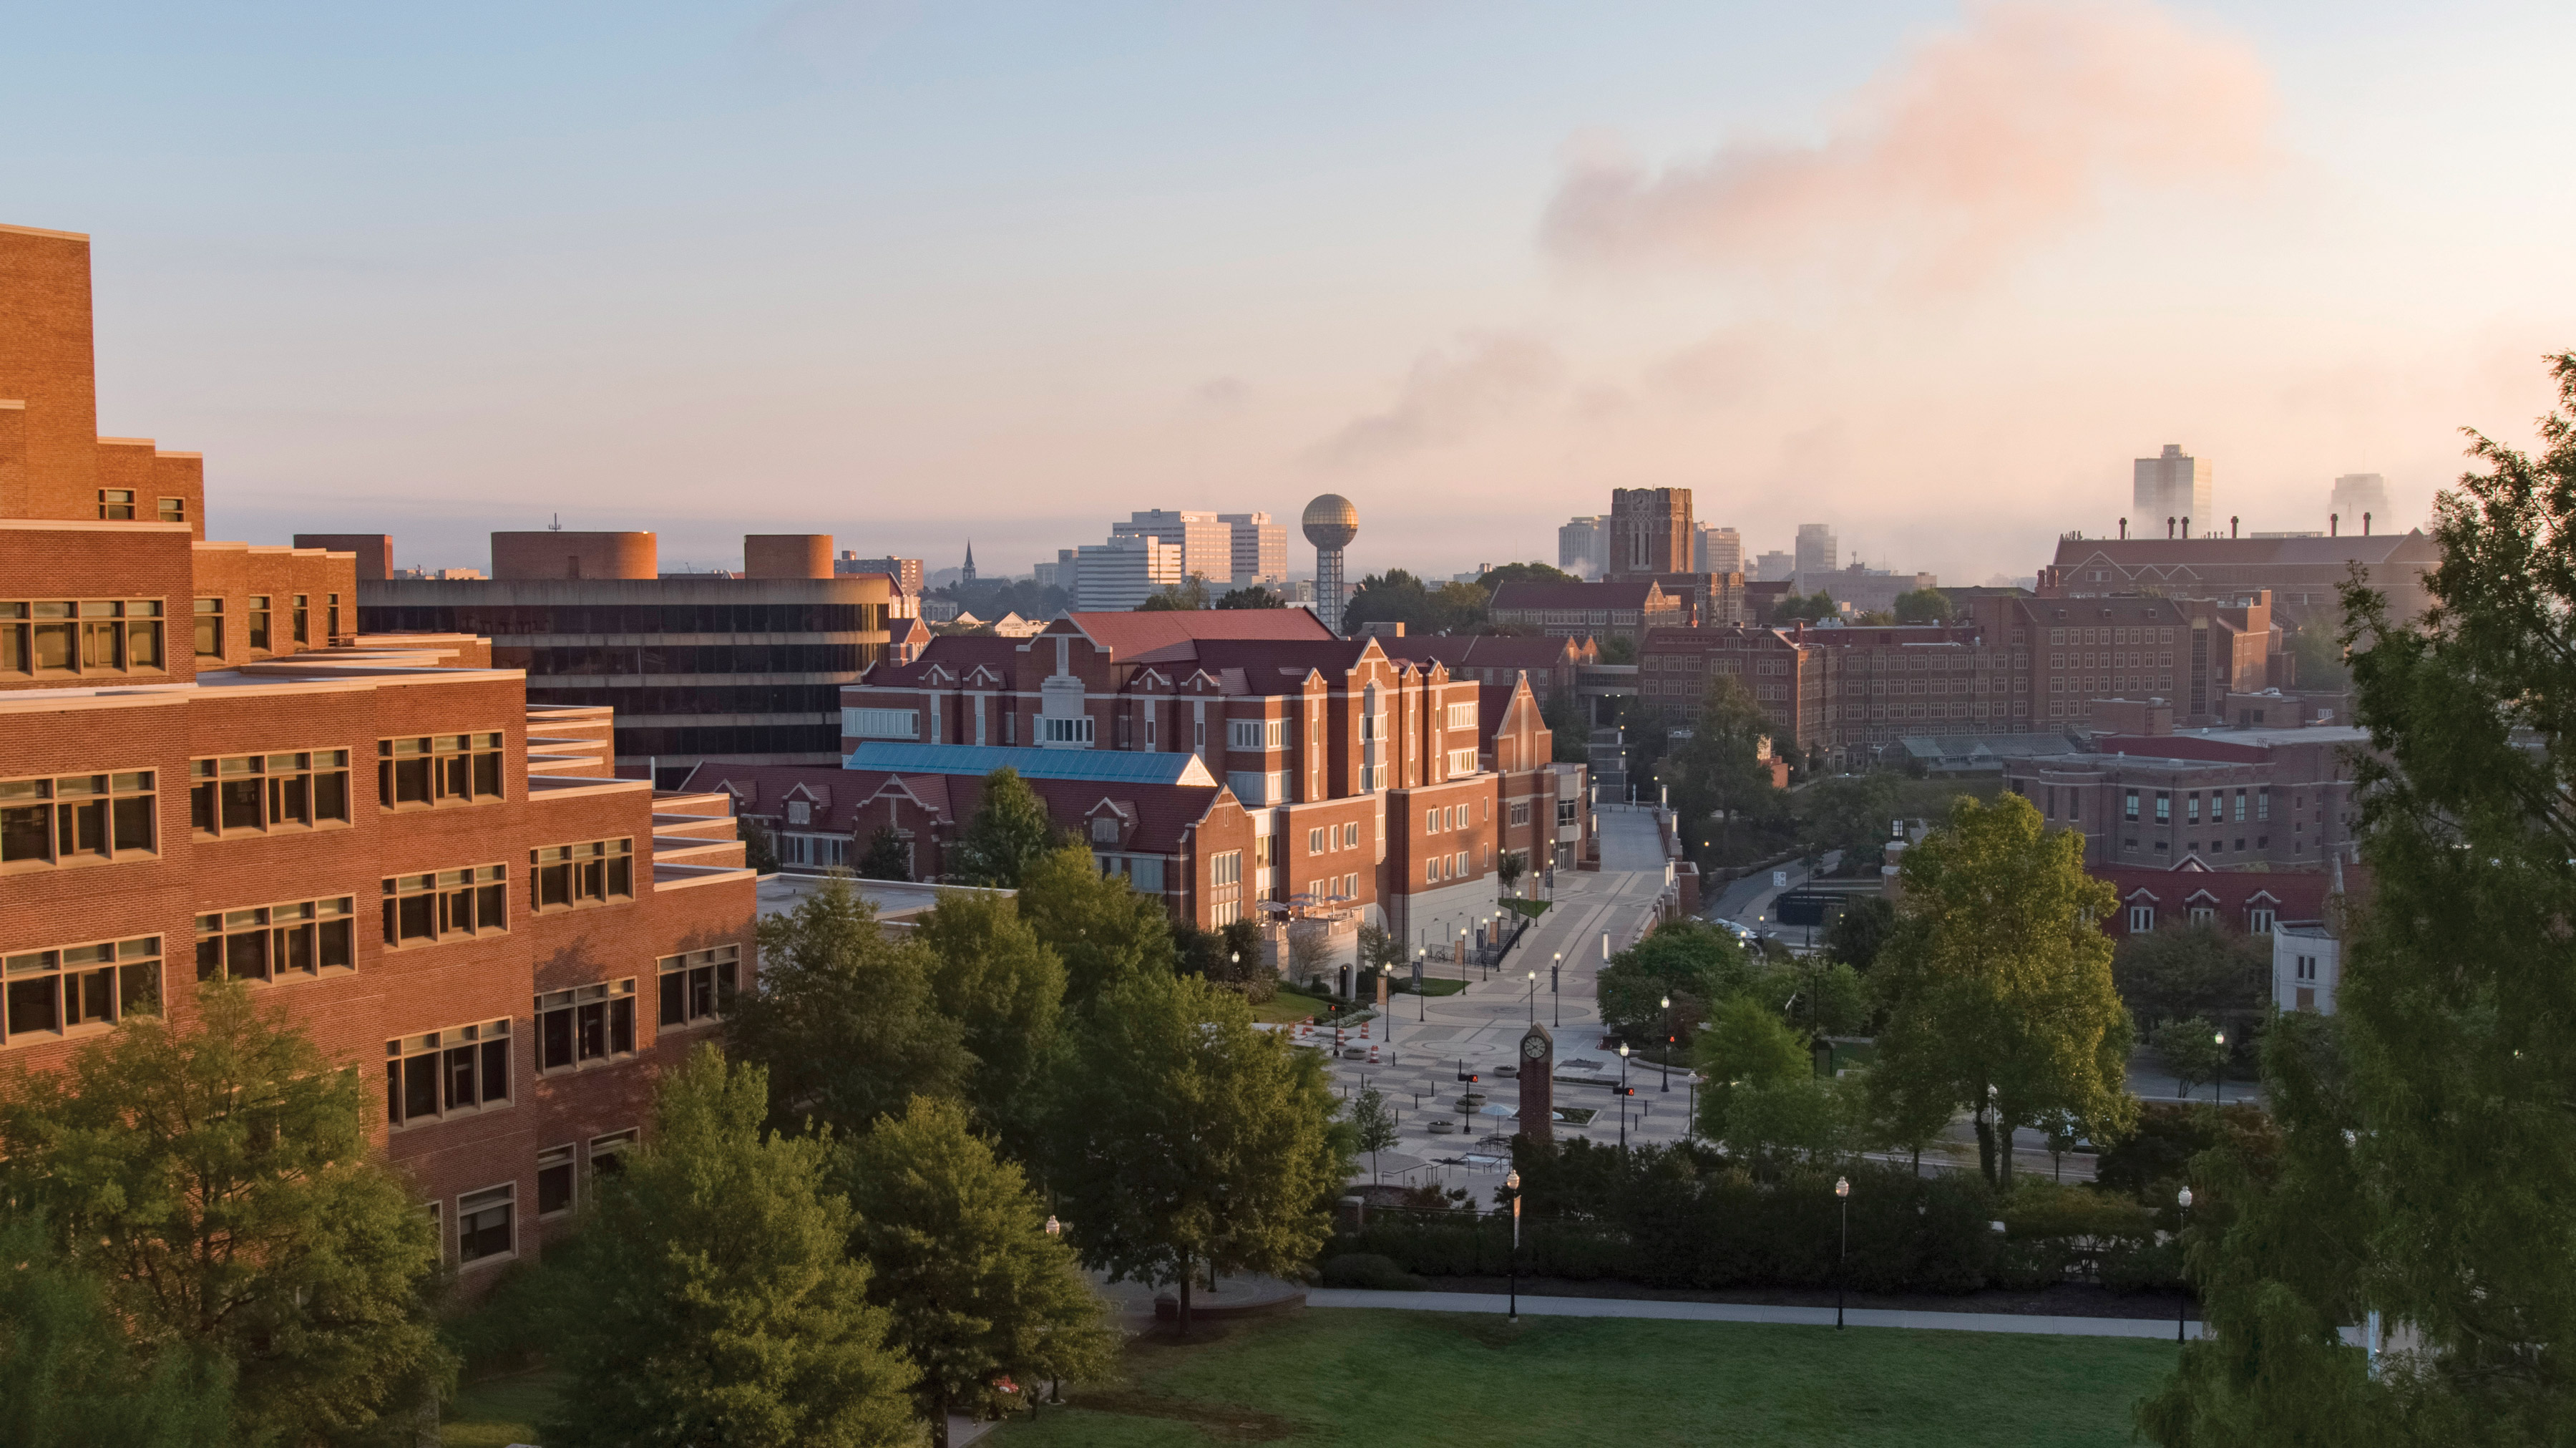 The UT Knoxville campus on an early morning